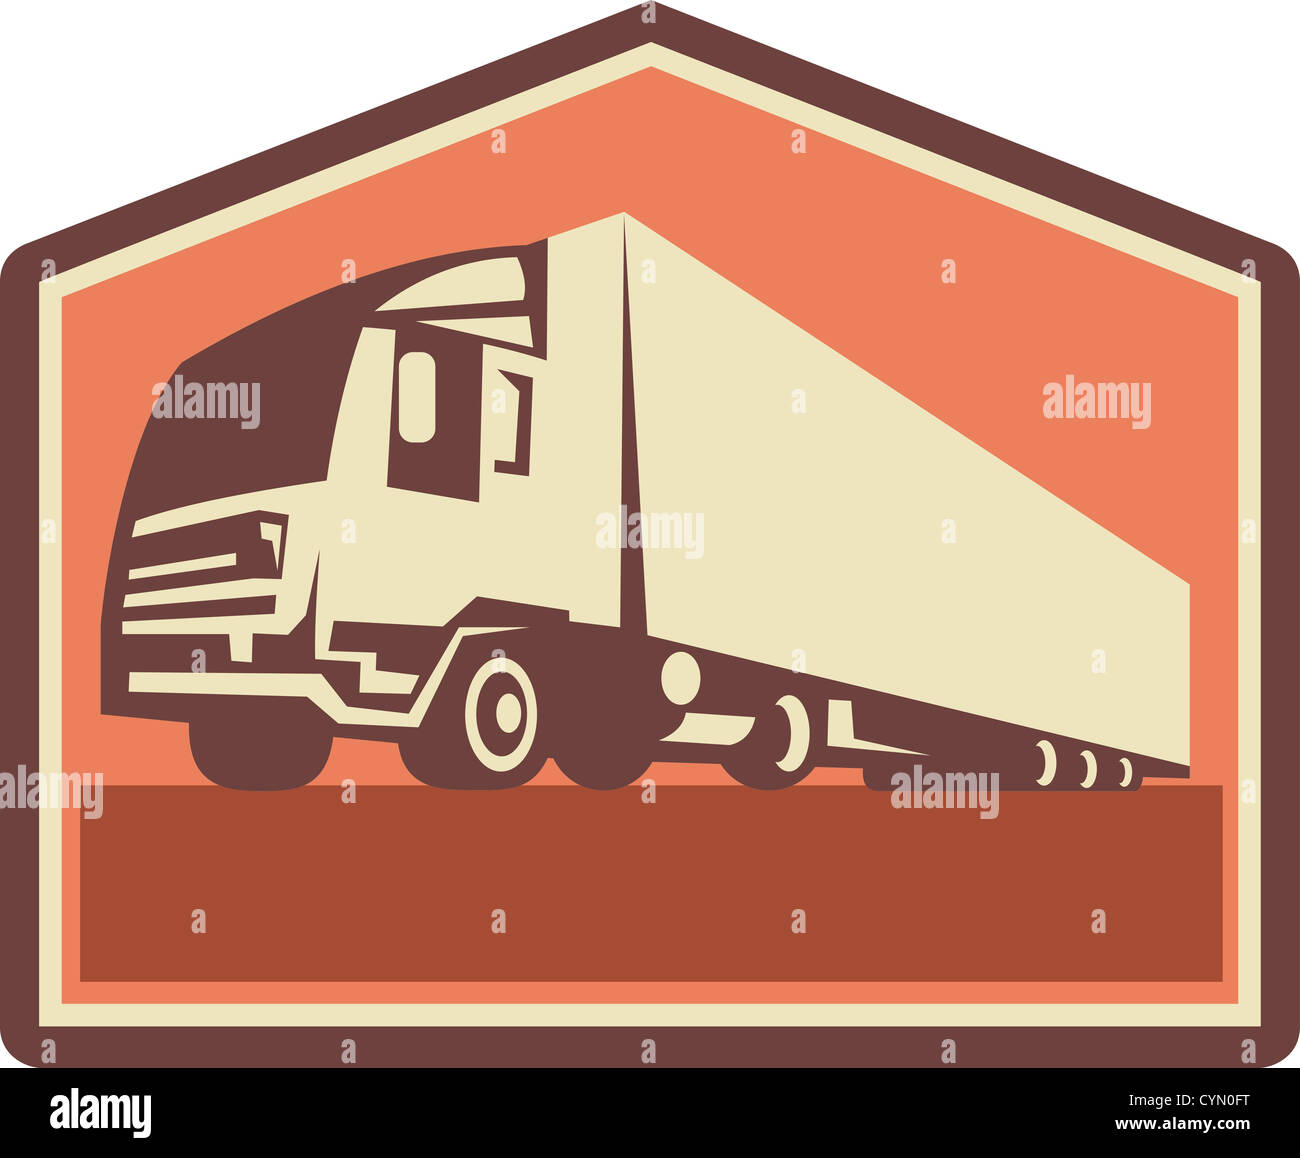 Illustration of a container truck and trailer lorry done in retro style viewed from a low angle. Stock Photo